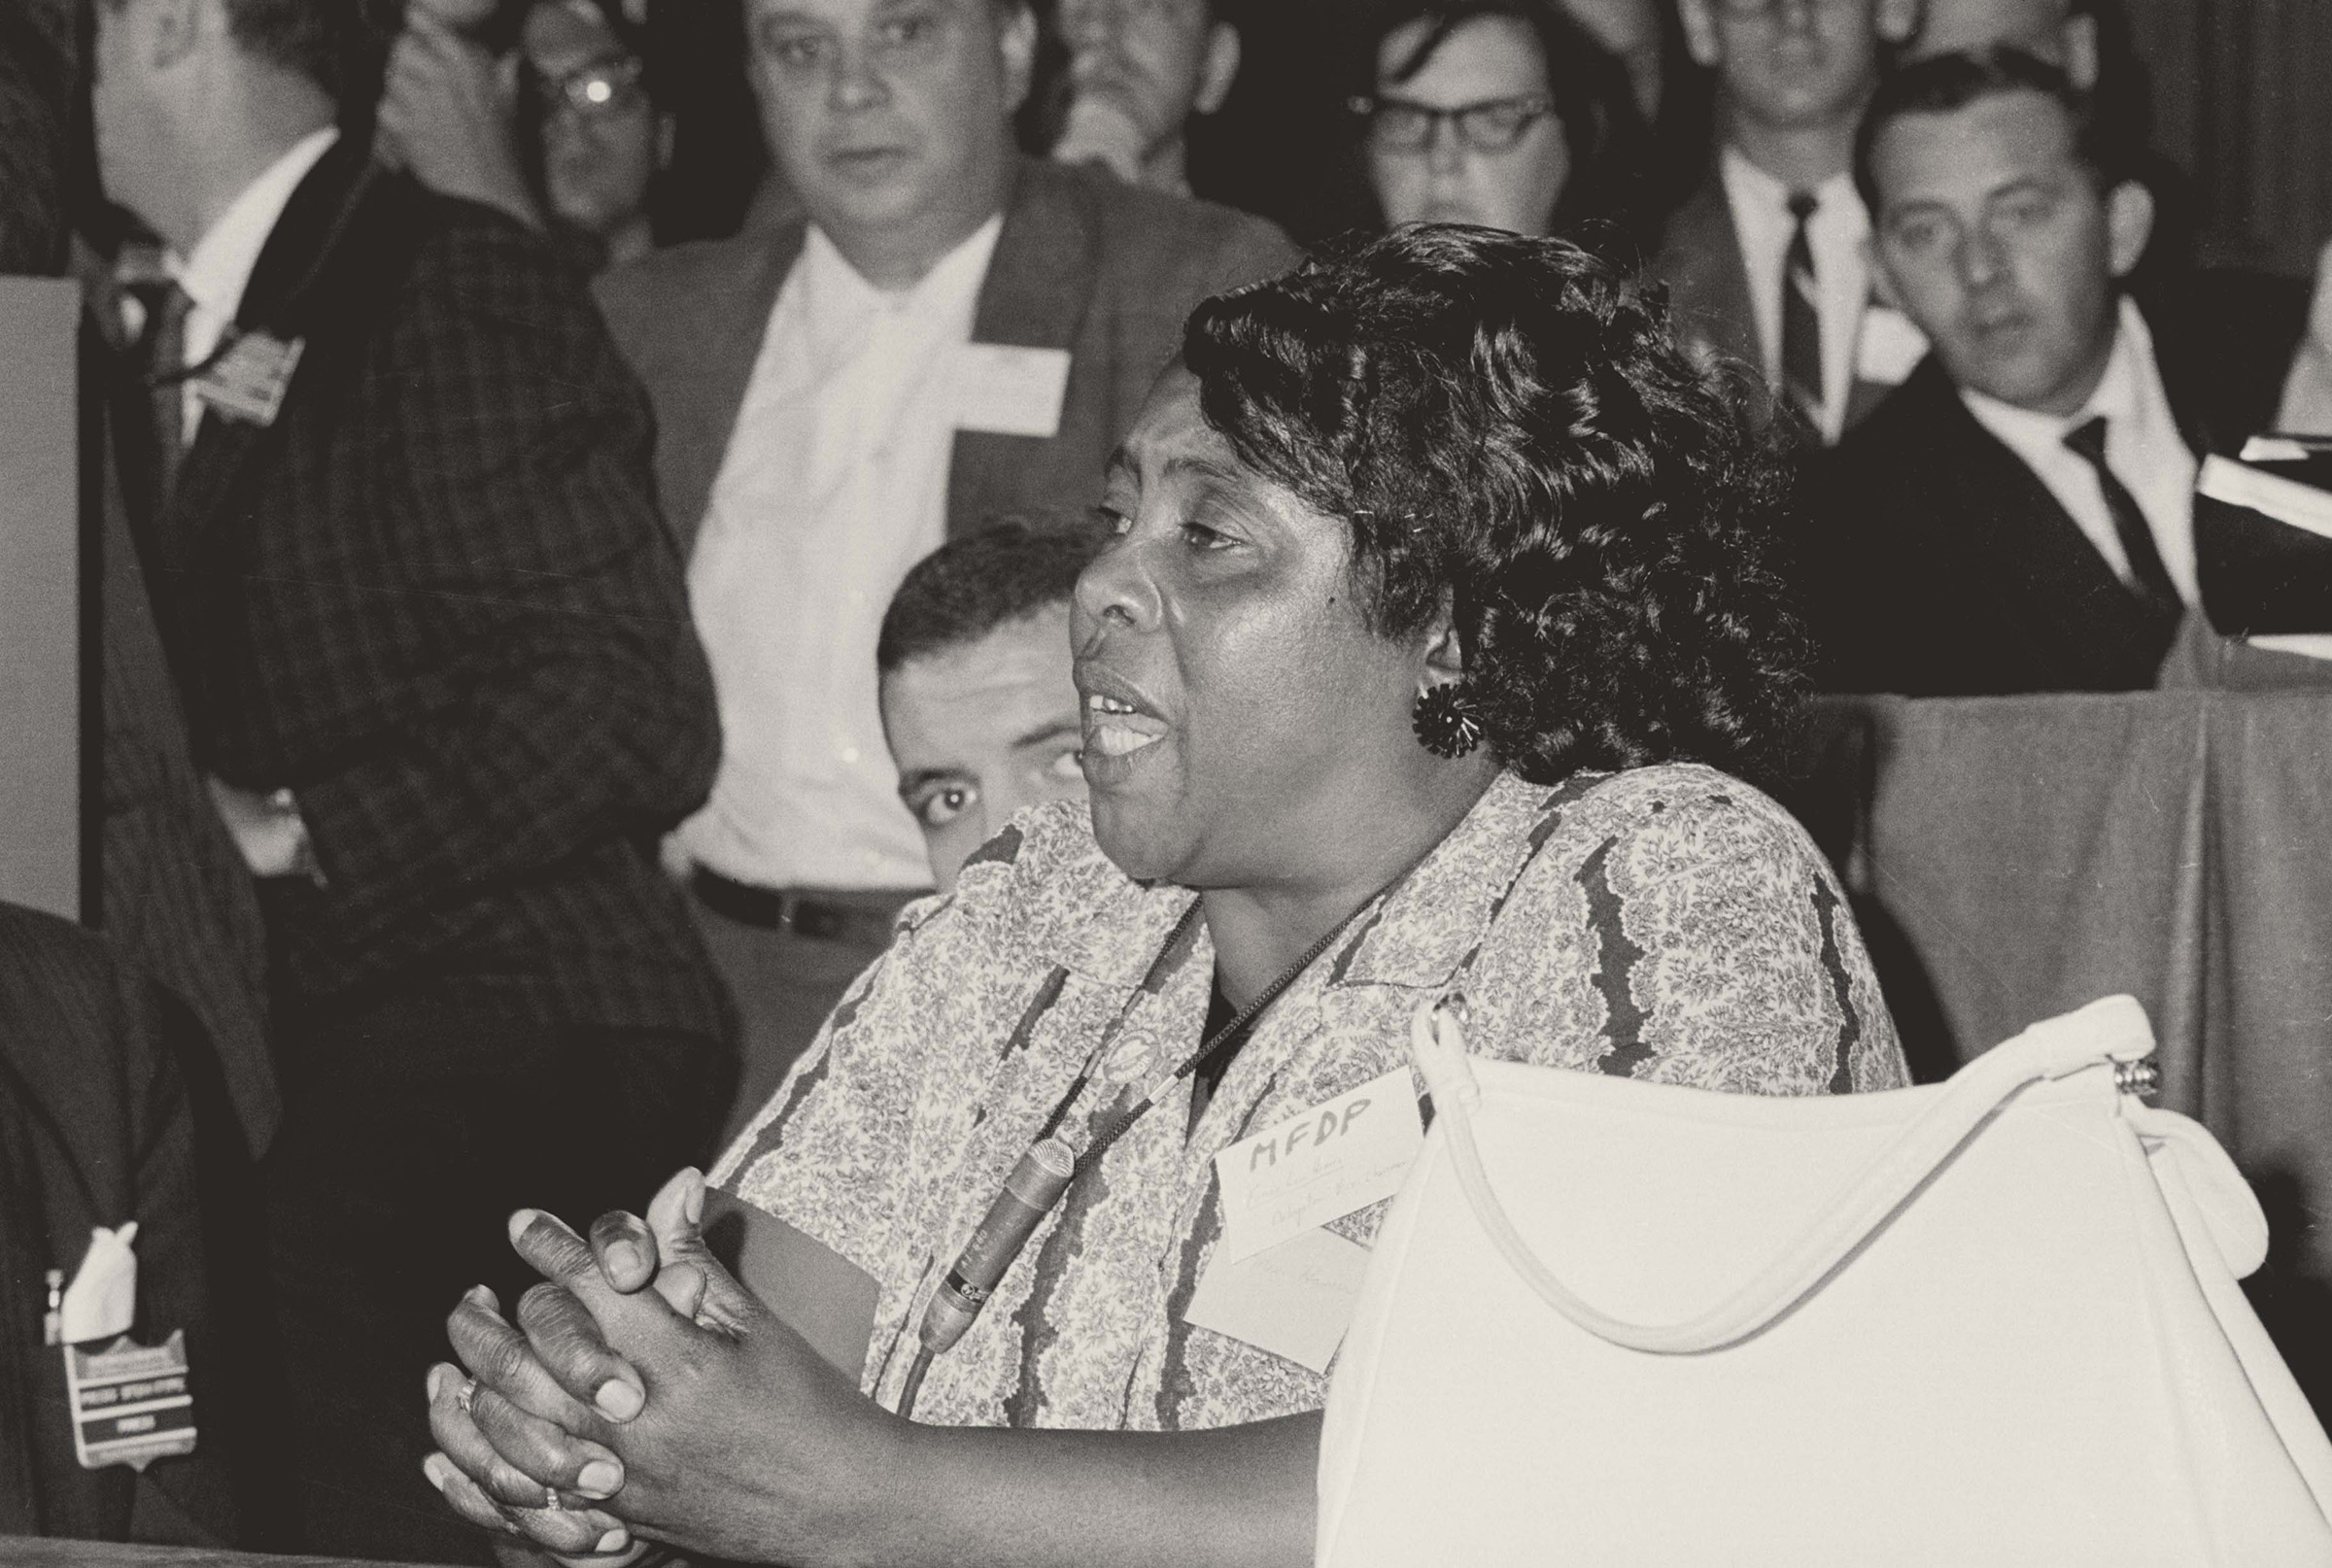 Fannie Lou Hamer Speaking in Atlantic City, 22 August 1964. Fannie Lou Hamer testifies to the credentials committee of the Democratic National Convention. As a member of the Mississippi Freedom Democratic Party, Hamer and others asked to be seated instead of Mississippi's all white delegation. Bettman/Bettman Collection. Photograph via Getty Images.